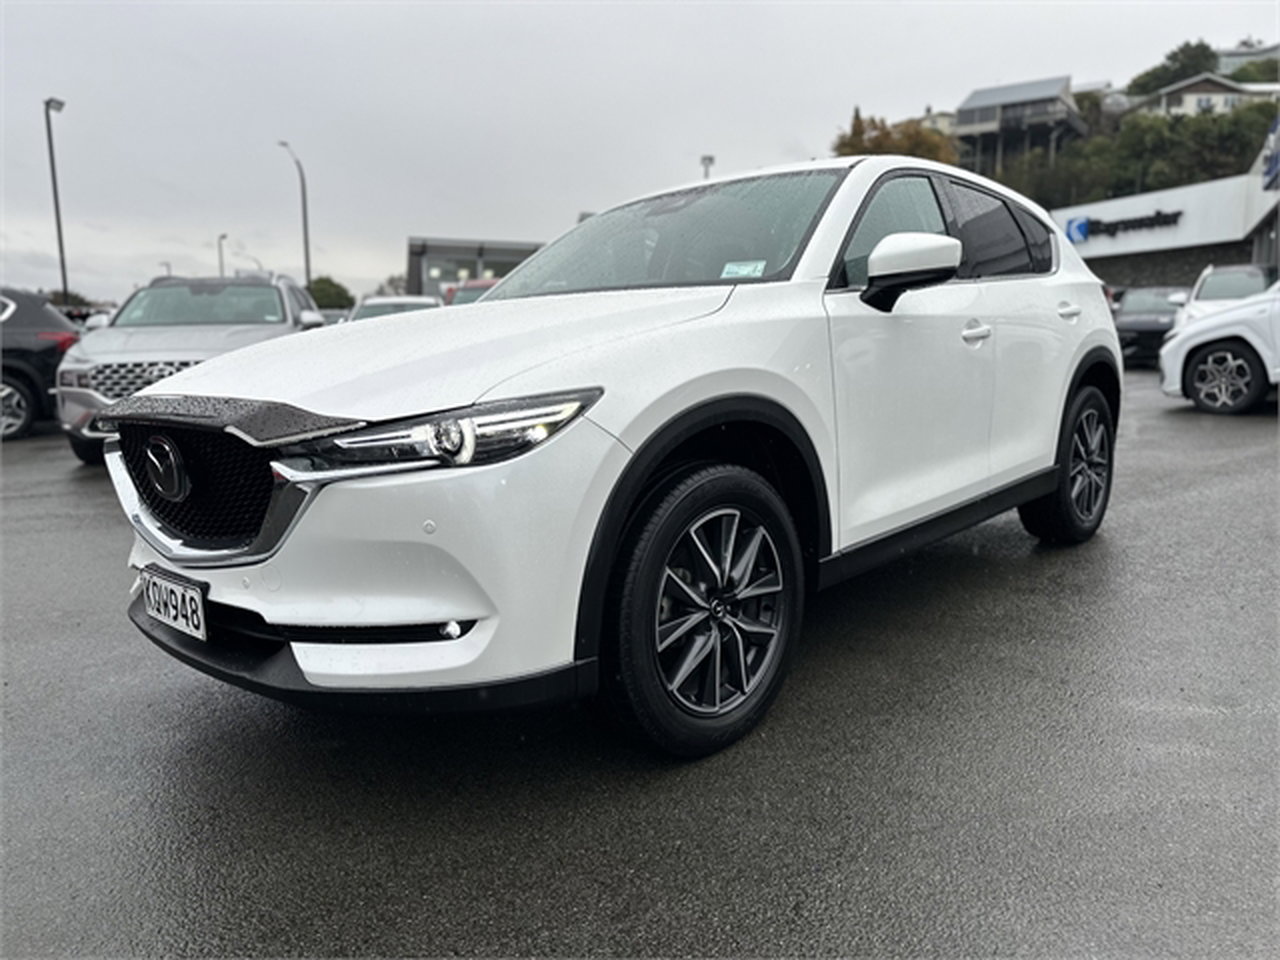 2017 Mazda CX-5 Limited 2.5 Facelift 4WD NZ New